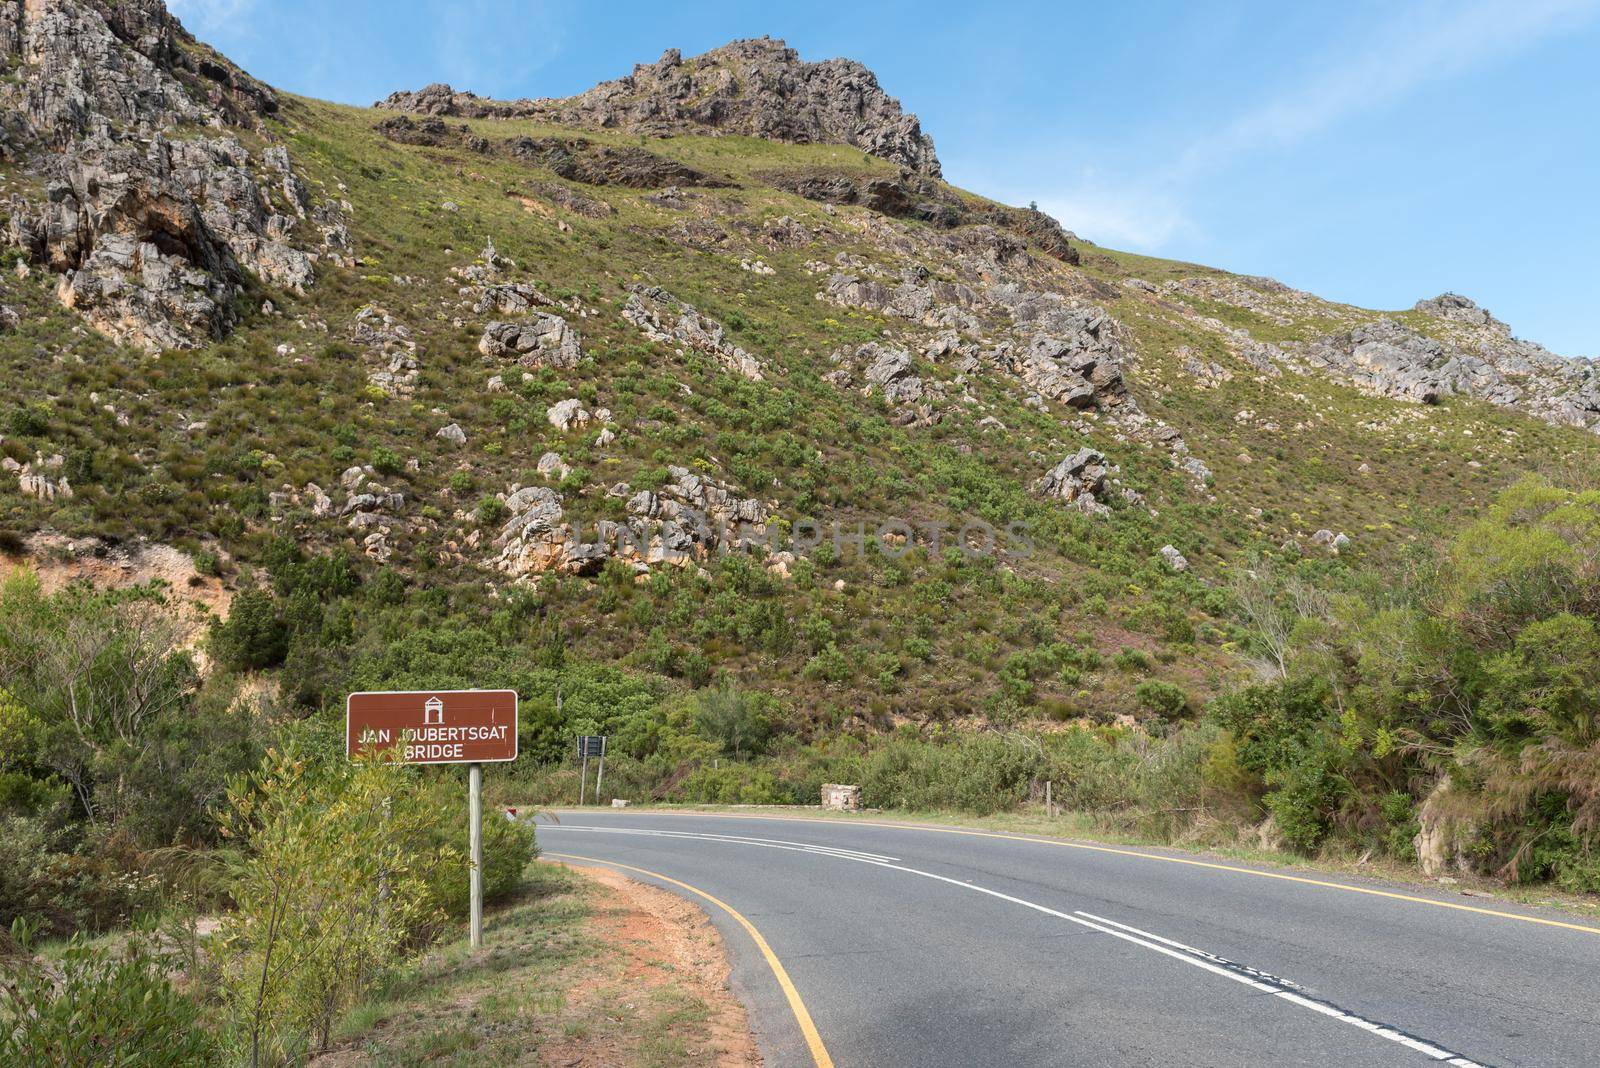 The Franschhoek Pass in the Western Cape Province crossing the Jan Joubertsgat Bridge, the oldest stone bridge in use in South Africa